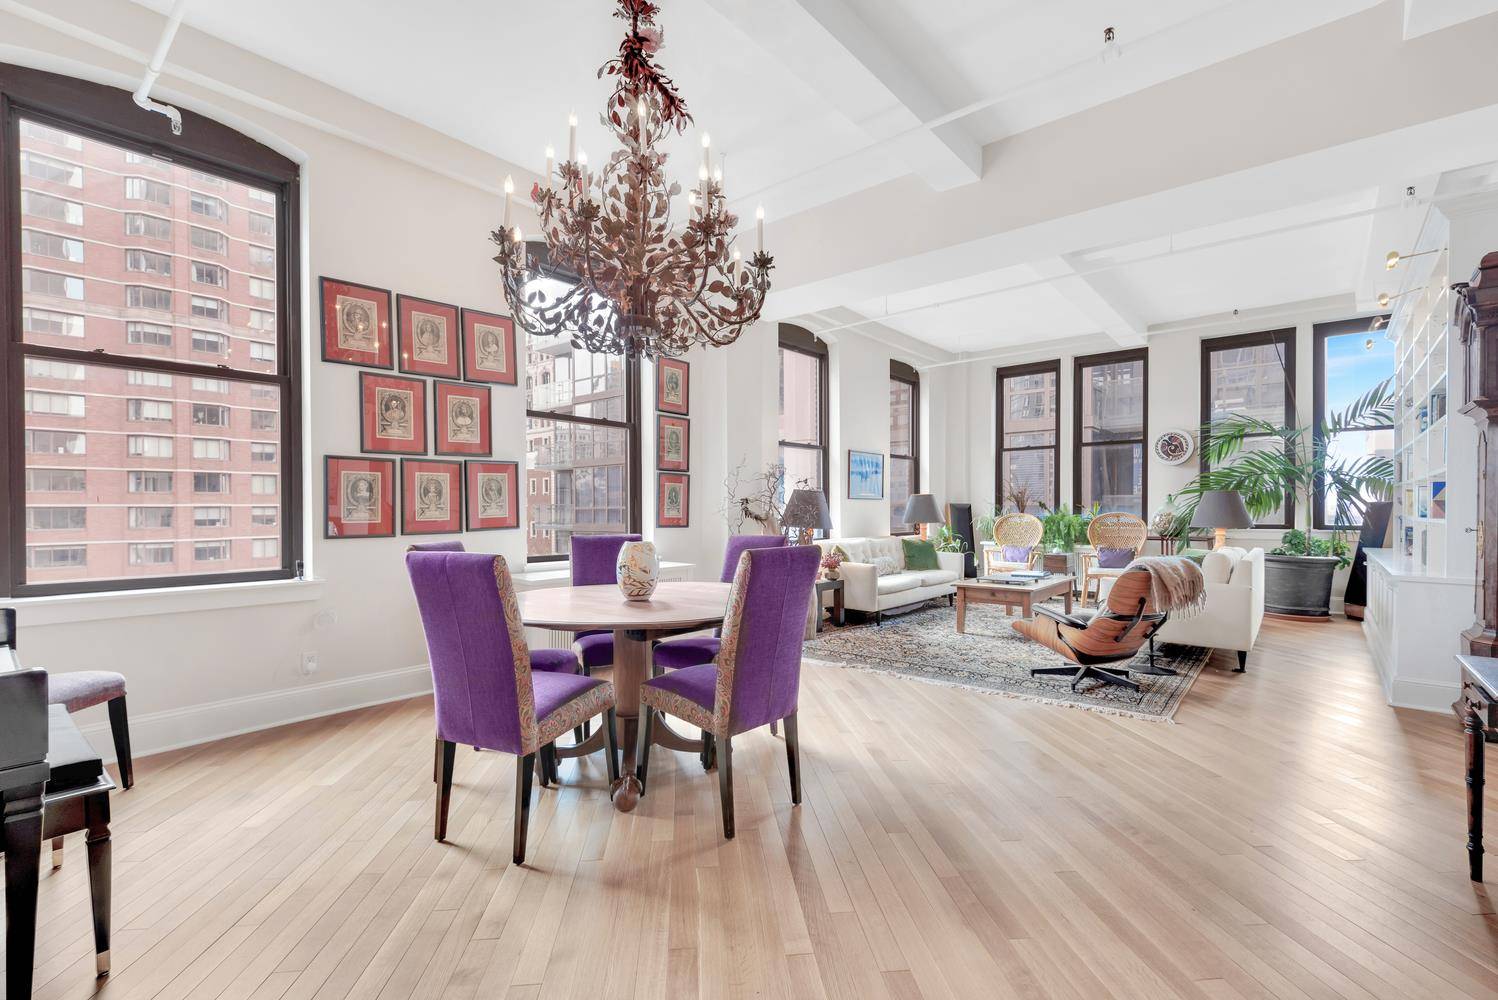 Built in 1911 and located in the heart of Chelsea NoMAd, this spectacular sprawling 2500SF Penthouse Loft with over 1500SF of private outdoor space could be your next home.